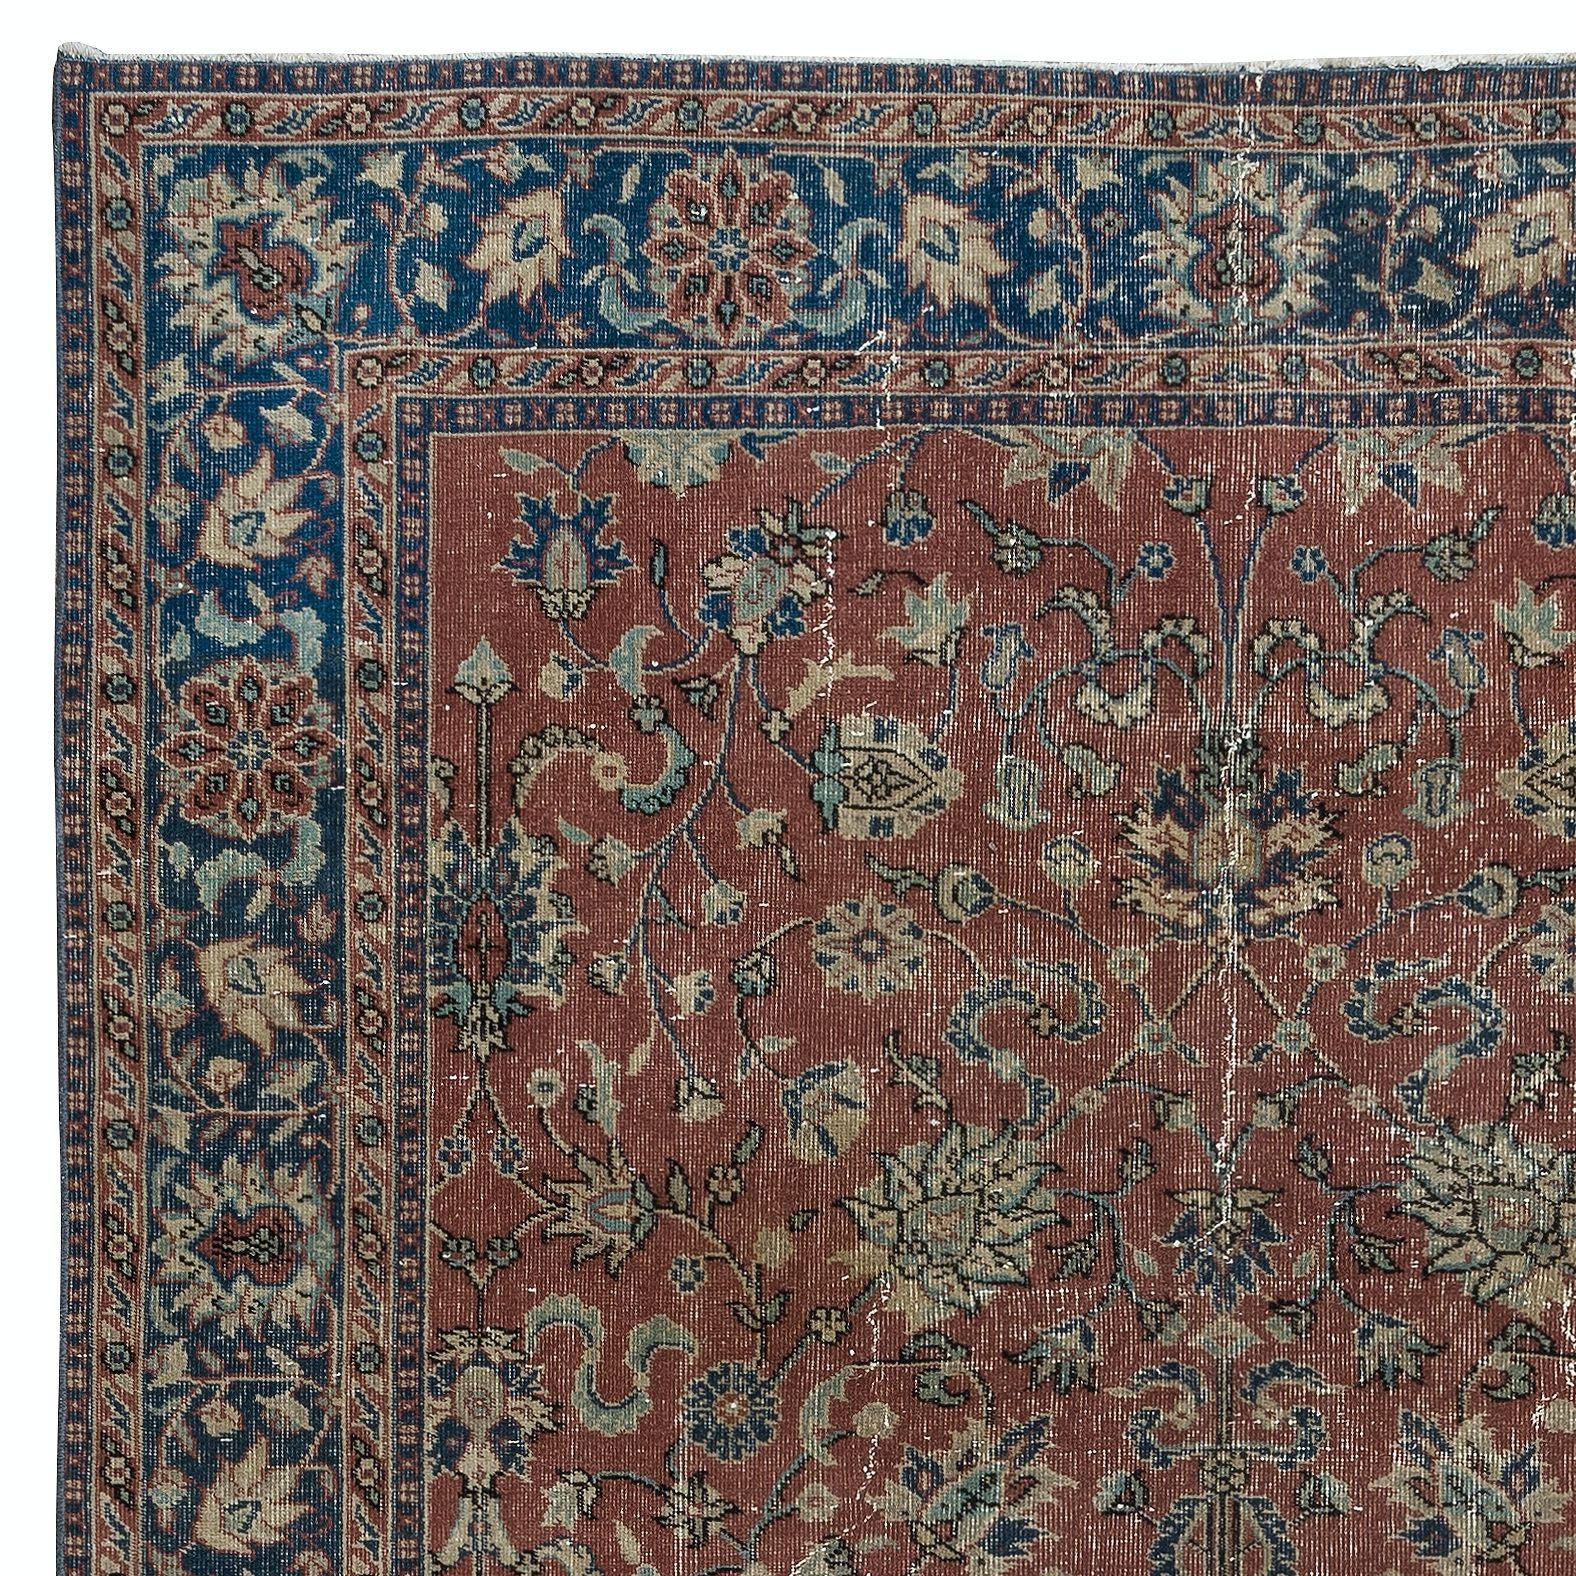 Tribal 6.3x9 Ft Romantic Vintage Handmade Rug in Red & Dark Blue with Botanical Design For Sale